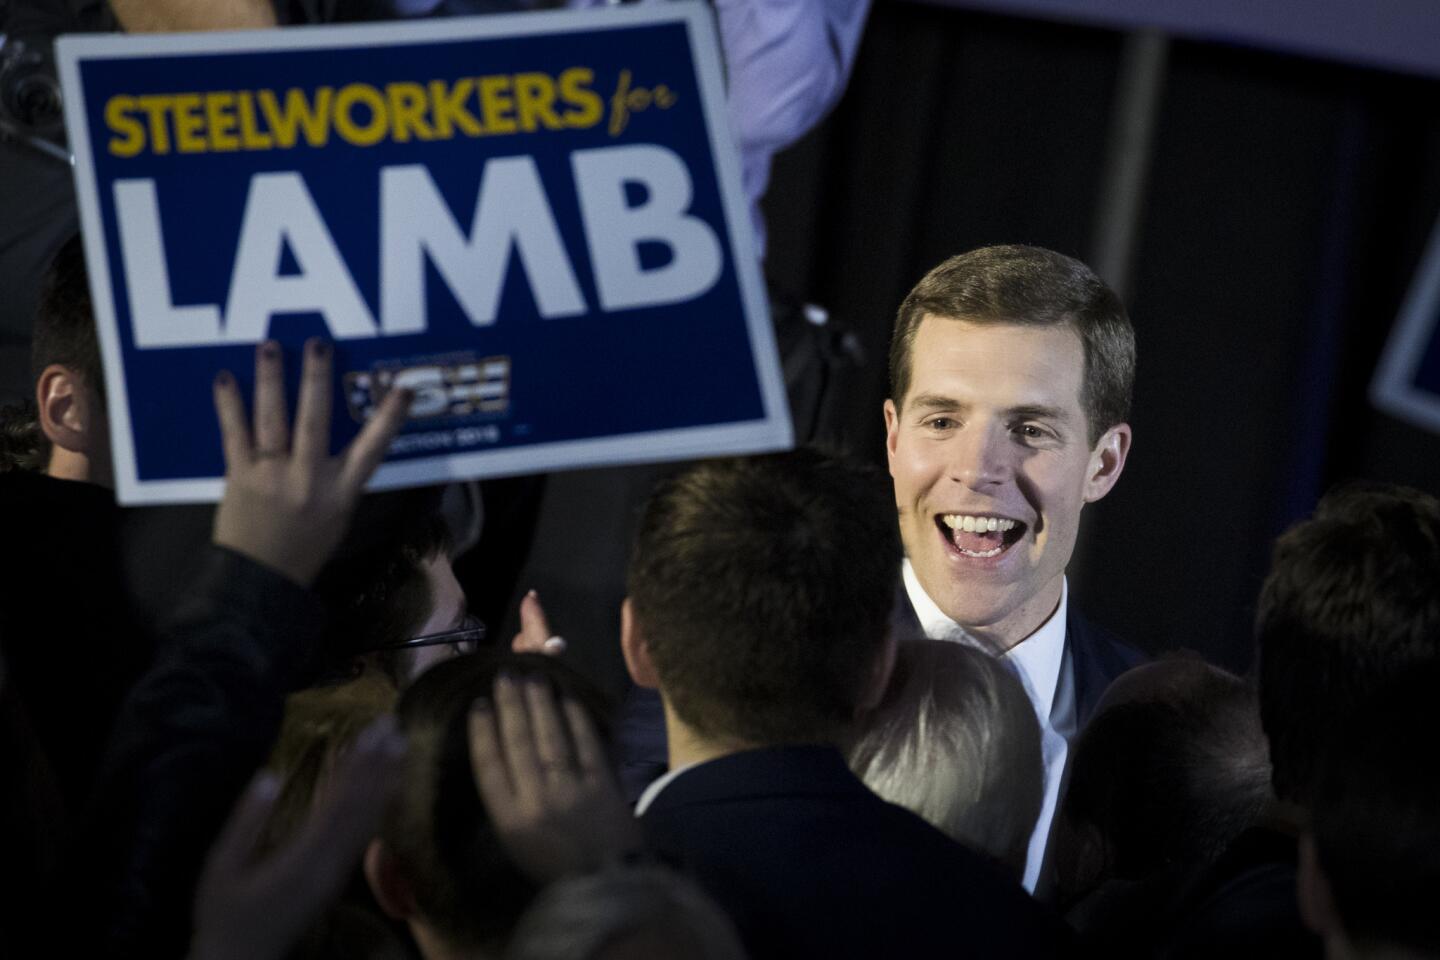 Conor Lamb, Democratic congressional candidate for Pennsylvania's 18th district, greets supporters at an election night rally March 14, 2018, in Canonsburg, Pa.